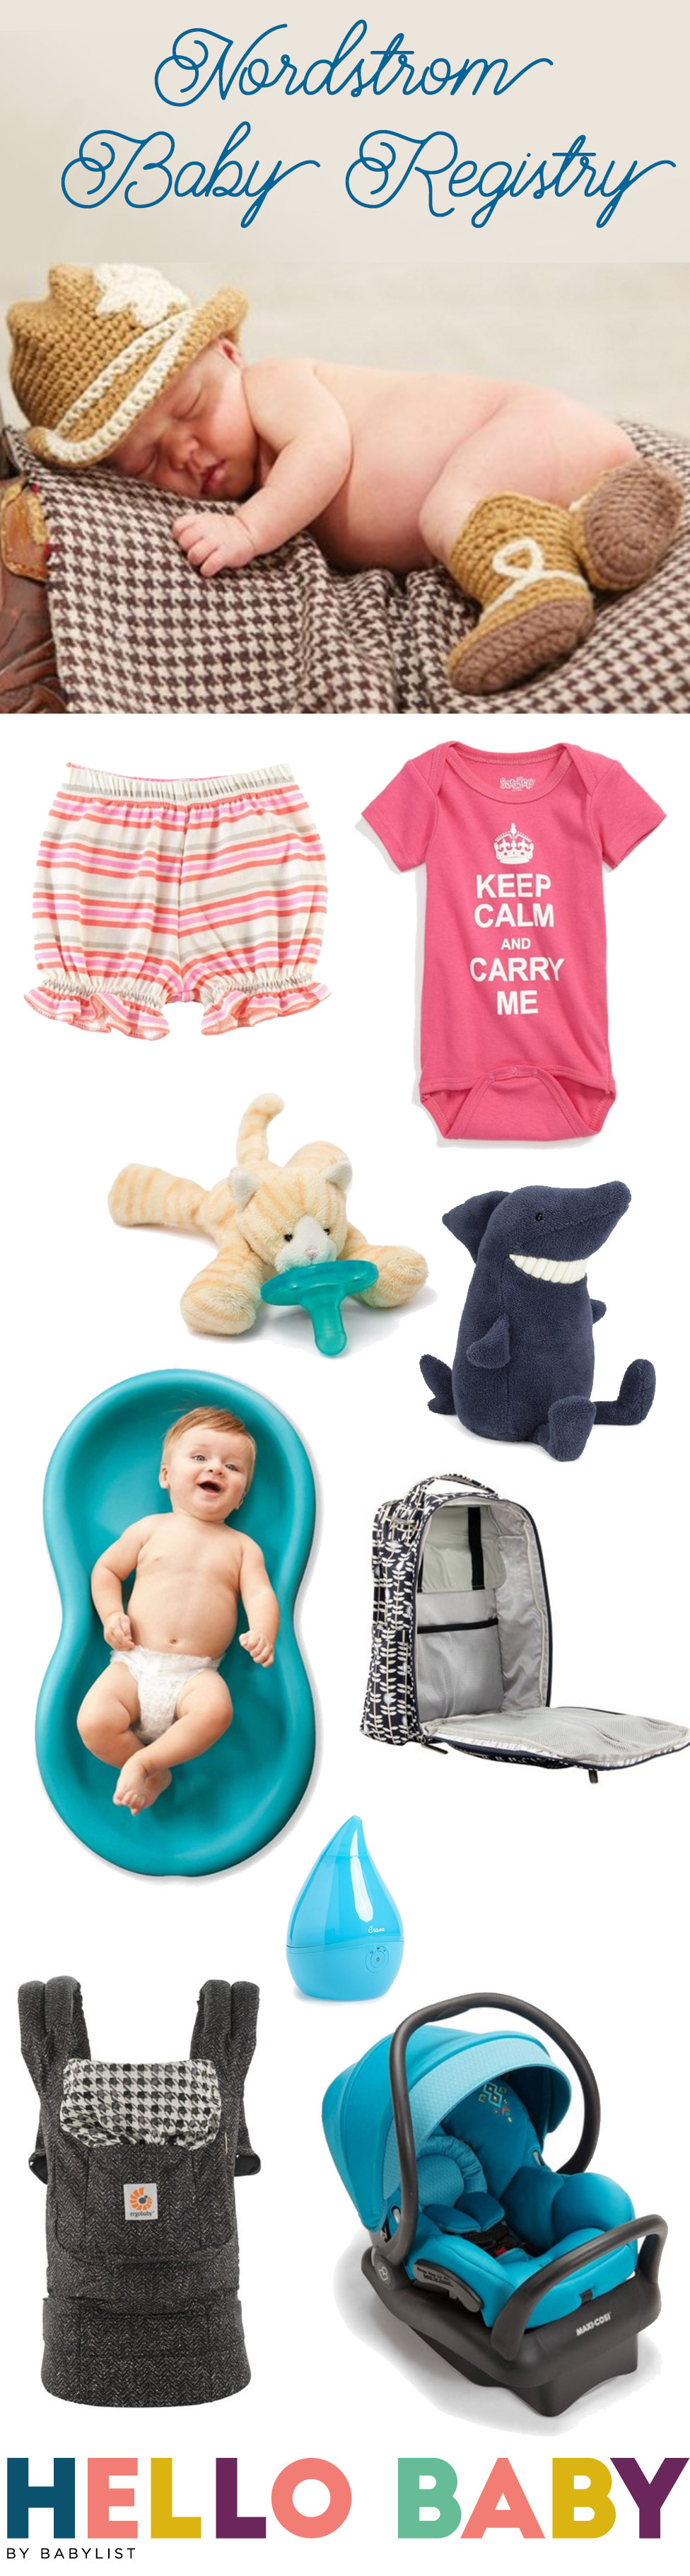 We combed the Nordstrom store looking for amazing finds for baby. Want to see what we discovered?